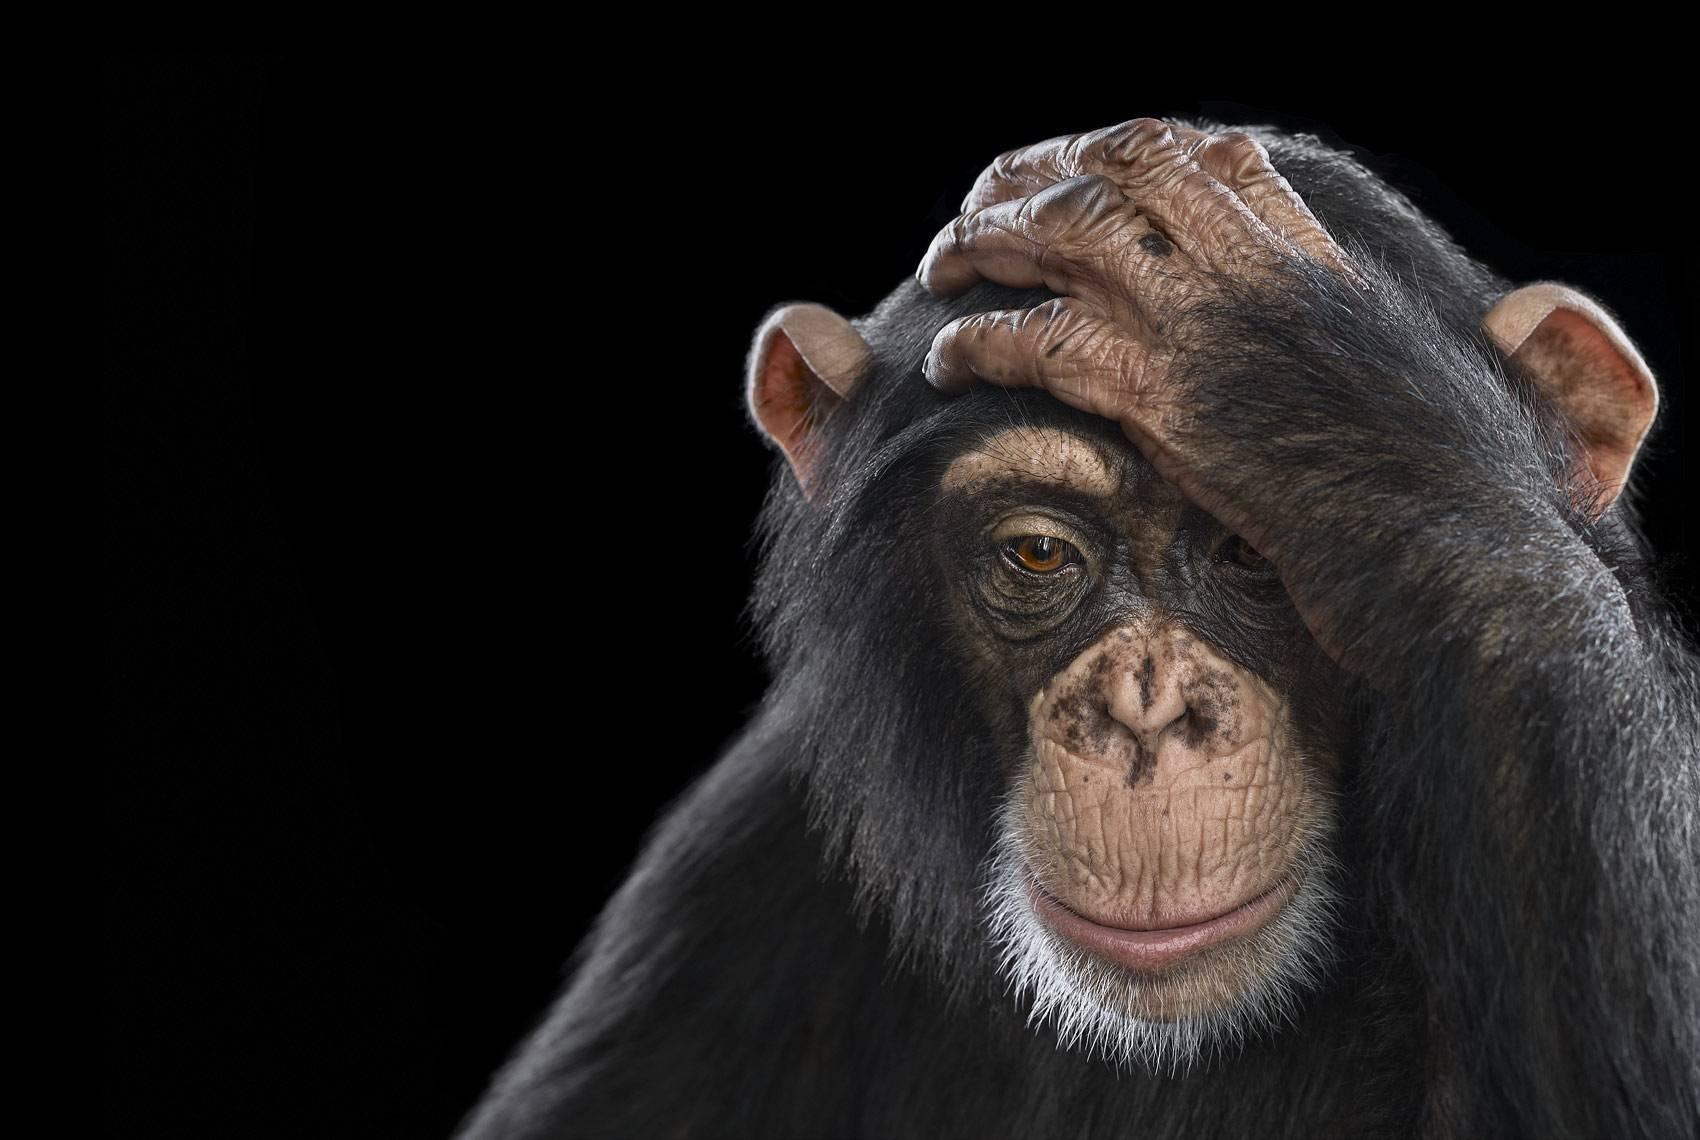 'Chimpanzee #2, Los Angeles, CA, 2010' is a limited-edition photograph by contemporary artist Brad Wilson from the ‘Affinity’ series which features studio portraits of wild animals. 

This photograph is sold unframed as a print only. It is available